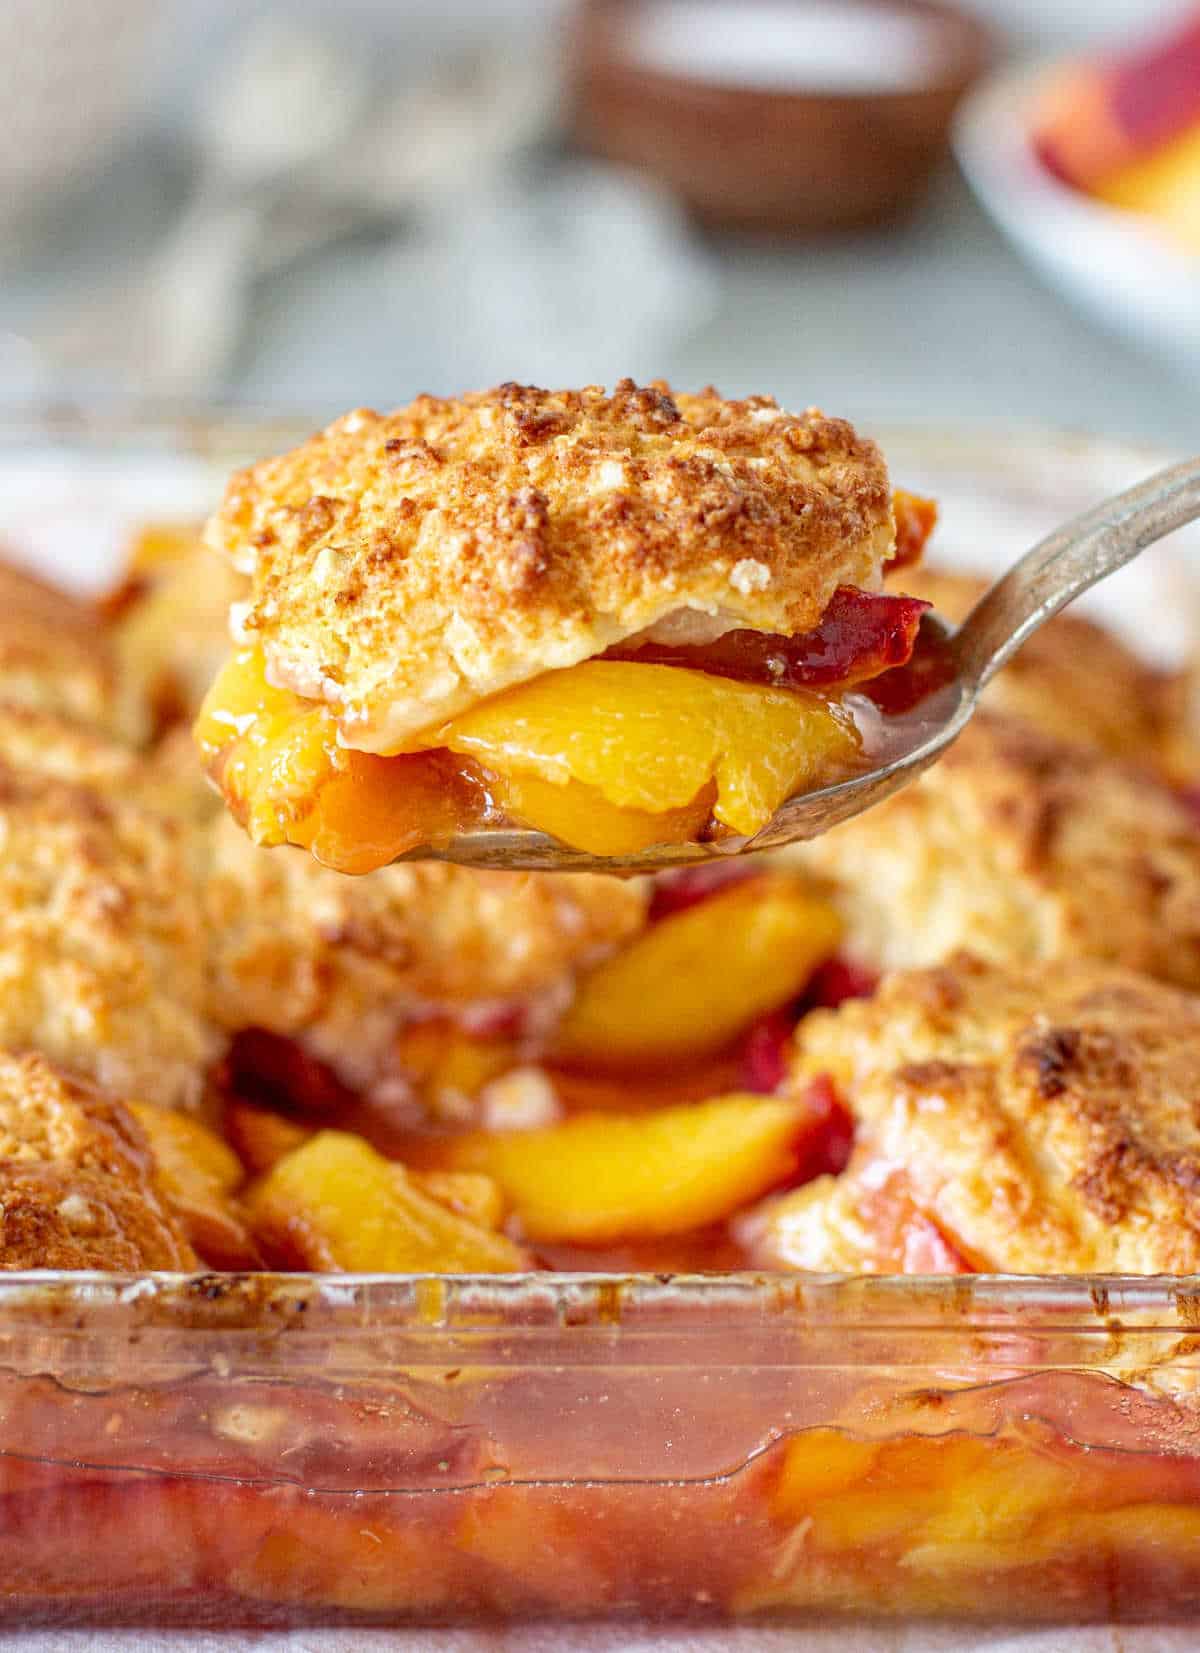 Lifting portion of peach cobbler from a glass dish with a silver spoon.